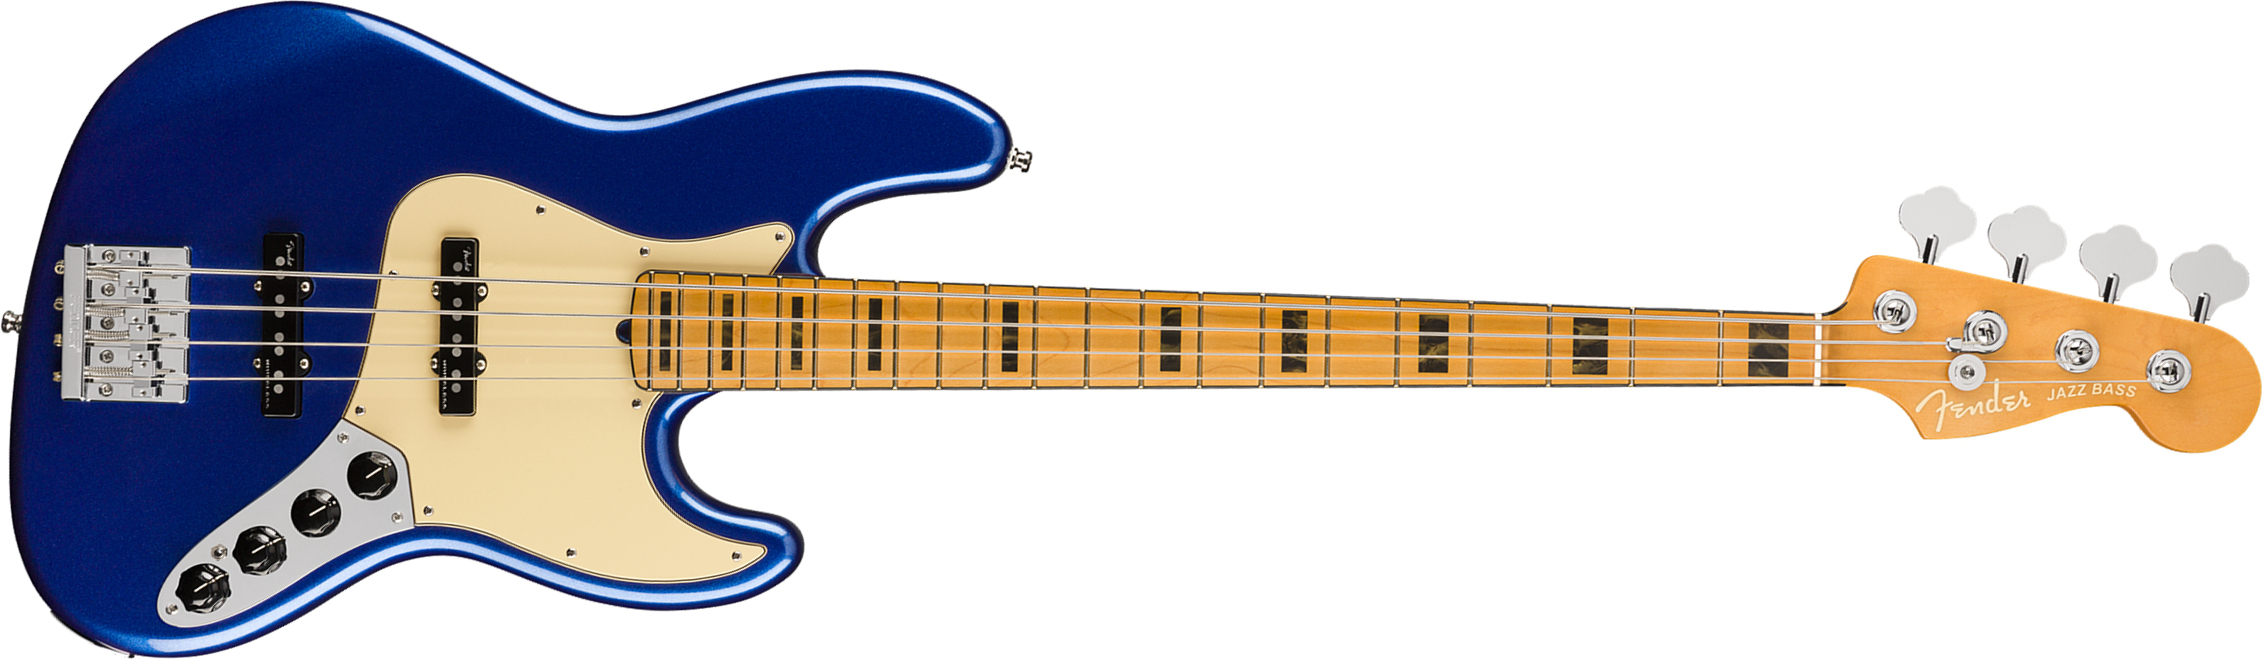 Fender Jazz Bass American Ultra 2019 Usa Mn - Cobra Blue - Basse Électrique Solid Body - Main picture